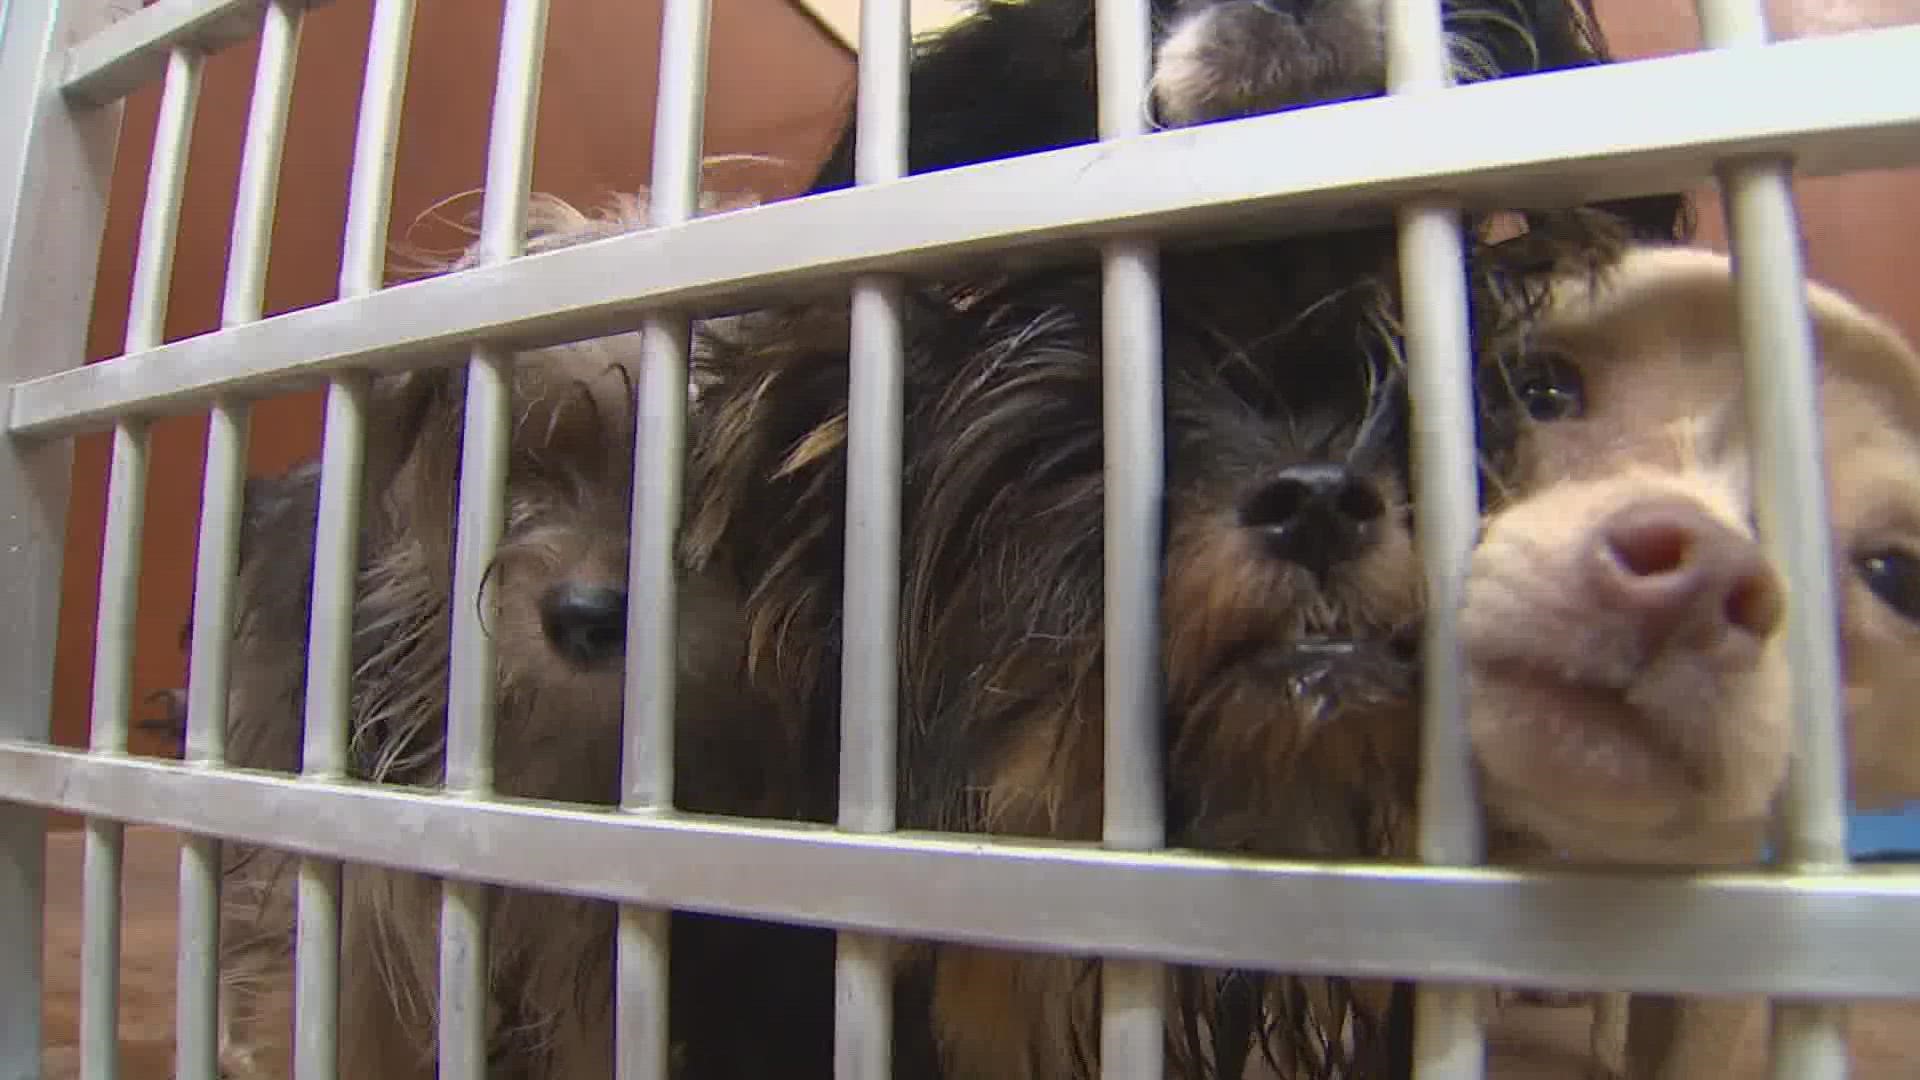 The Humane Society of Skagit Valley has had to close its doors to the public in order to take care of all of the animals.